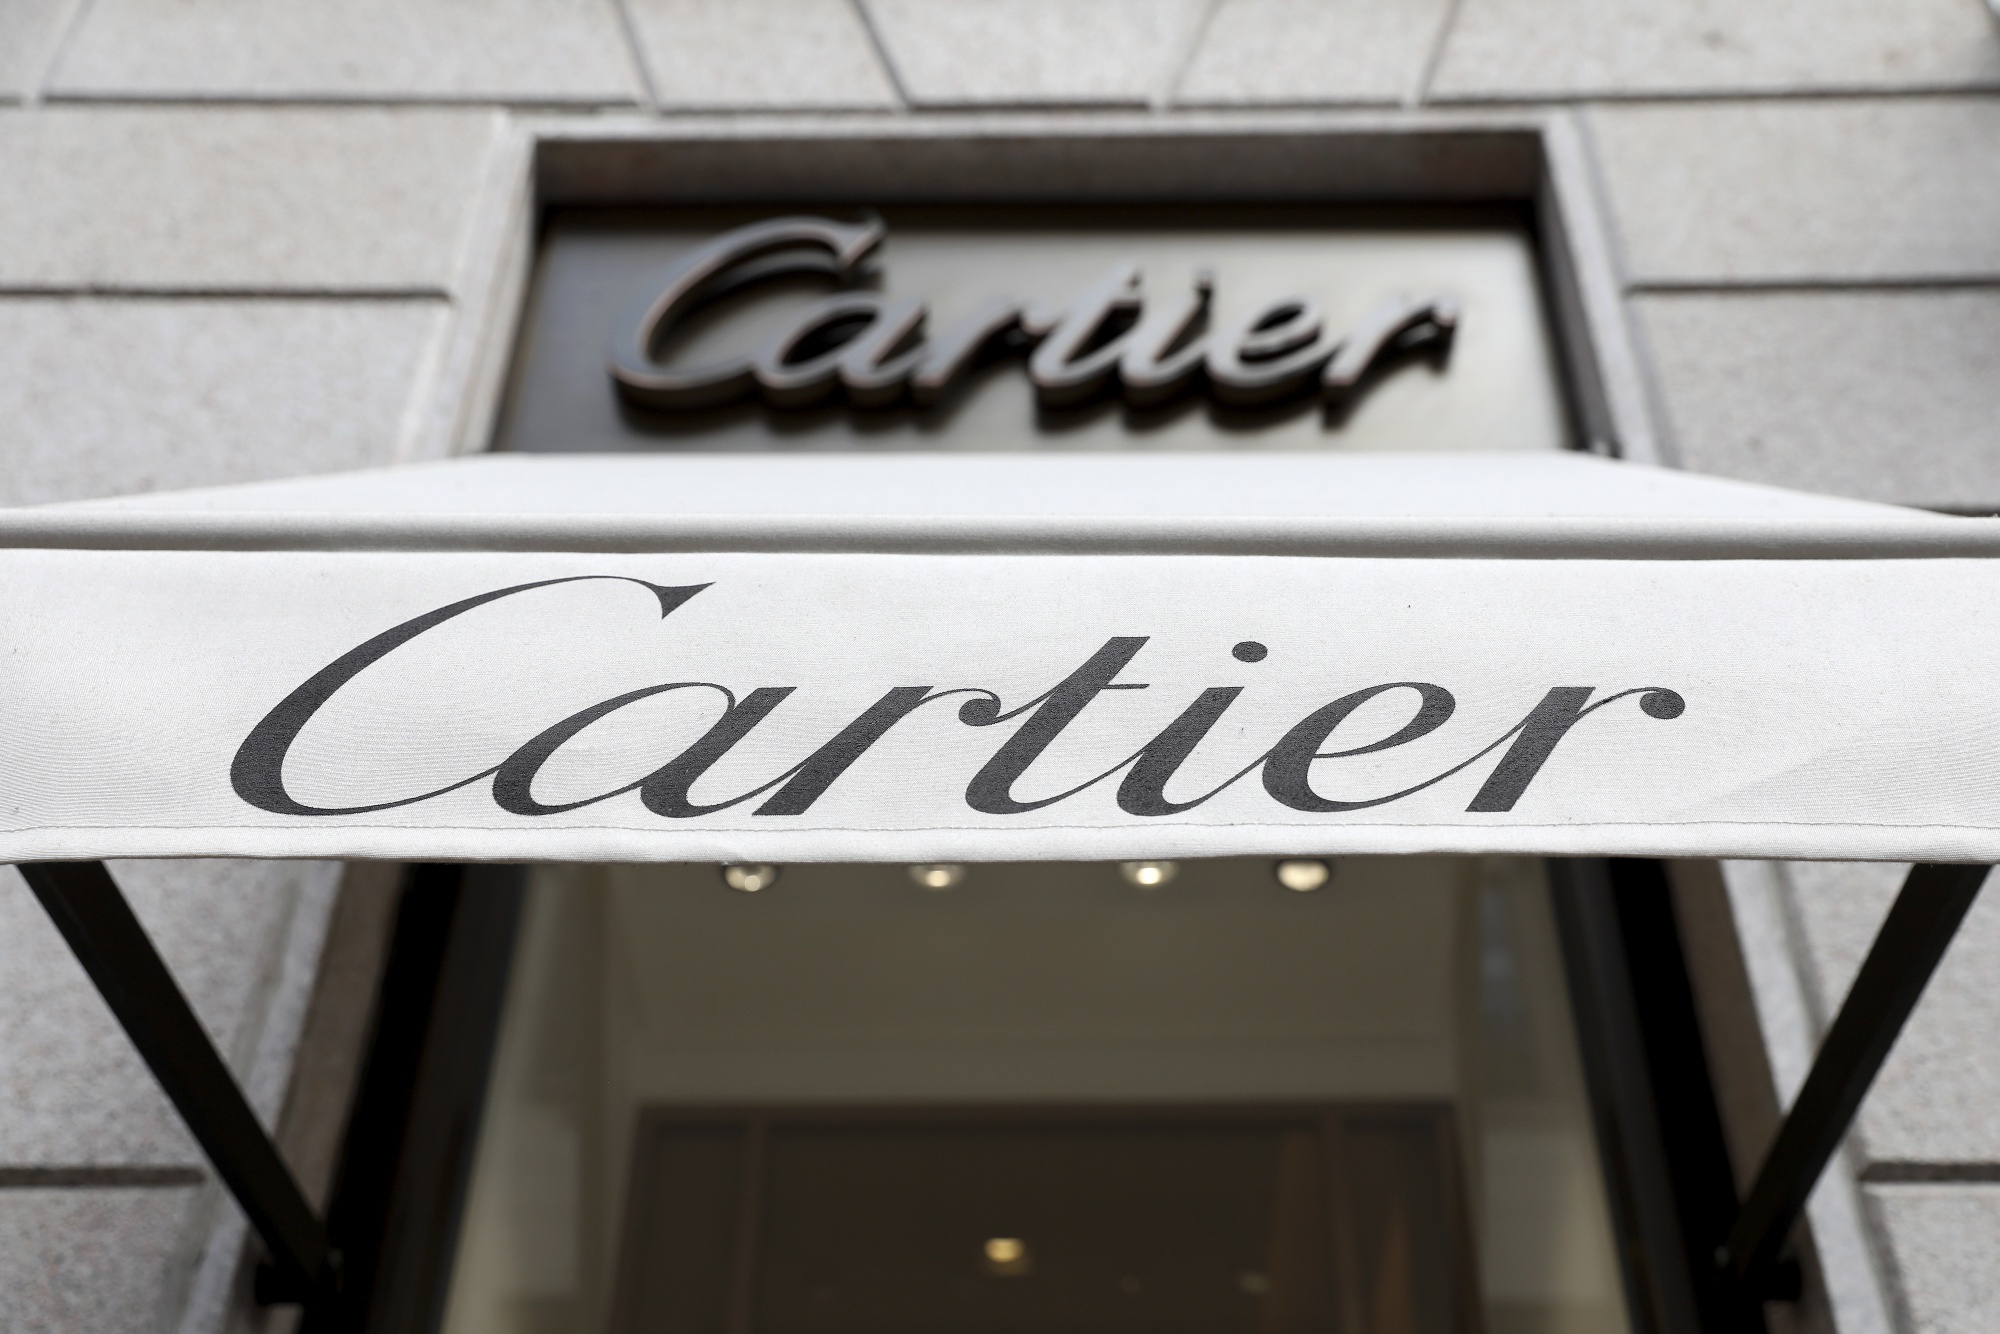 Cartier Gets a Temporary Store While Its Flagship Gets a Facelift